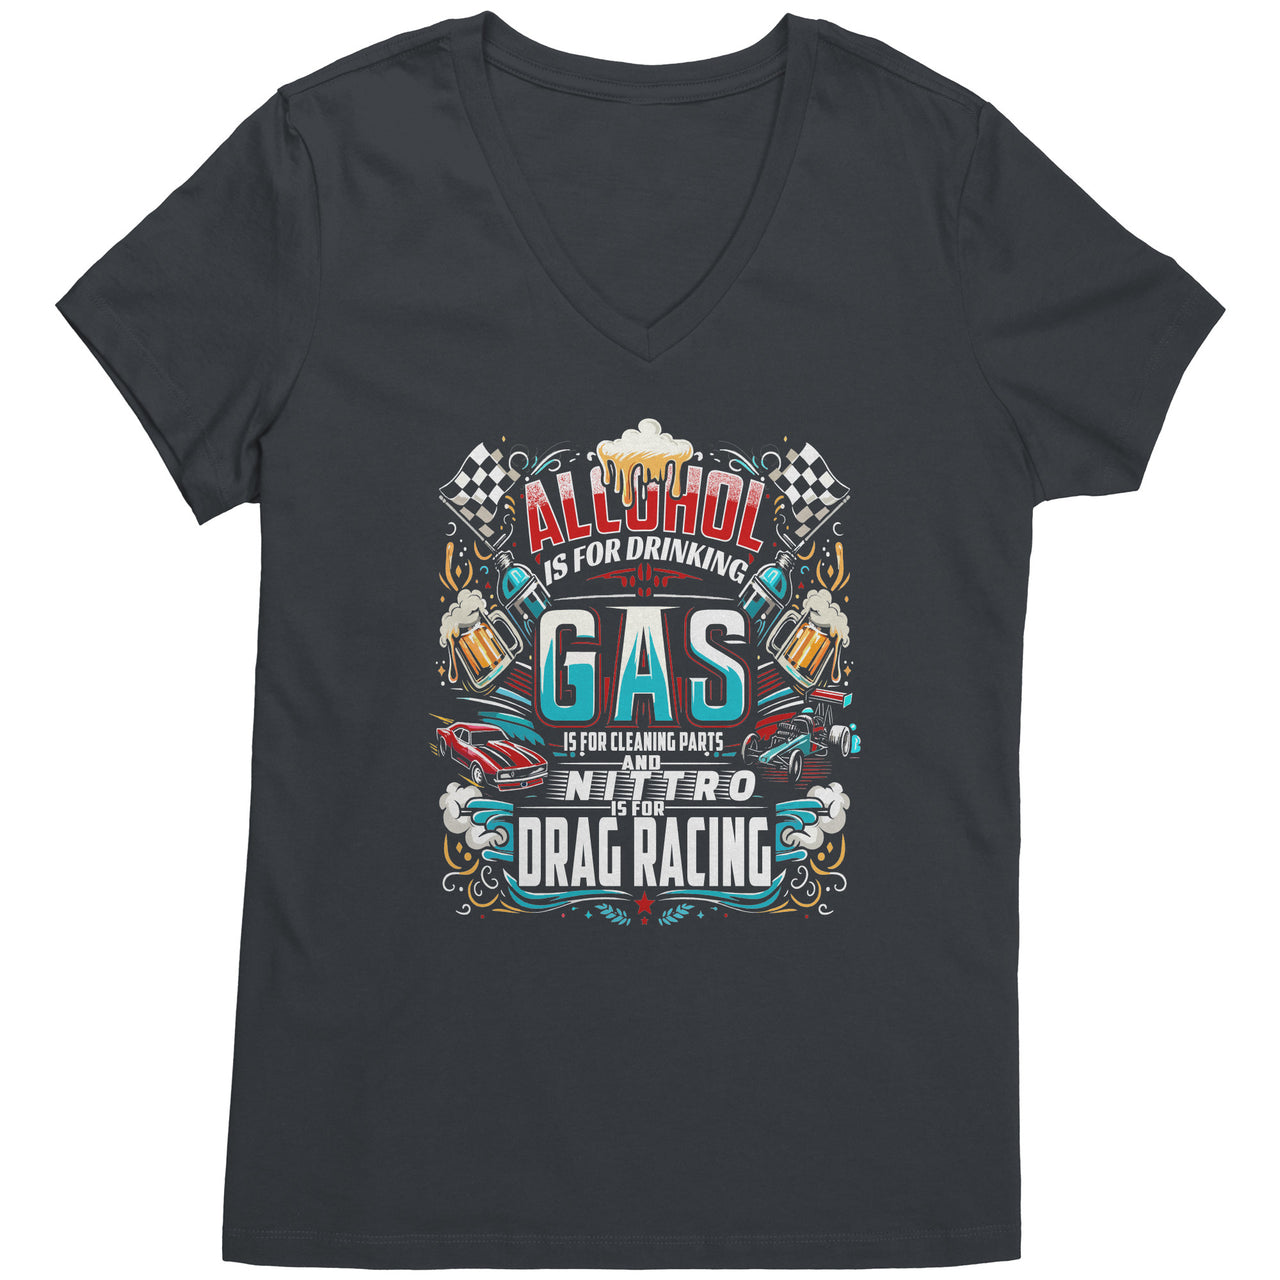 nitro is for drag racing Women's T-shirts